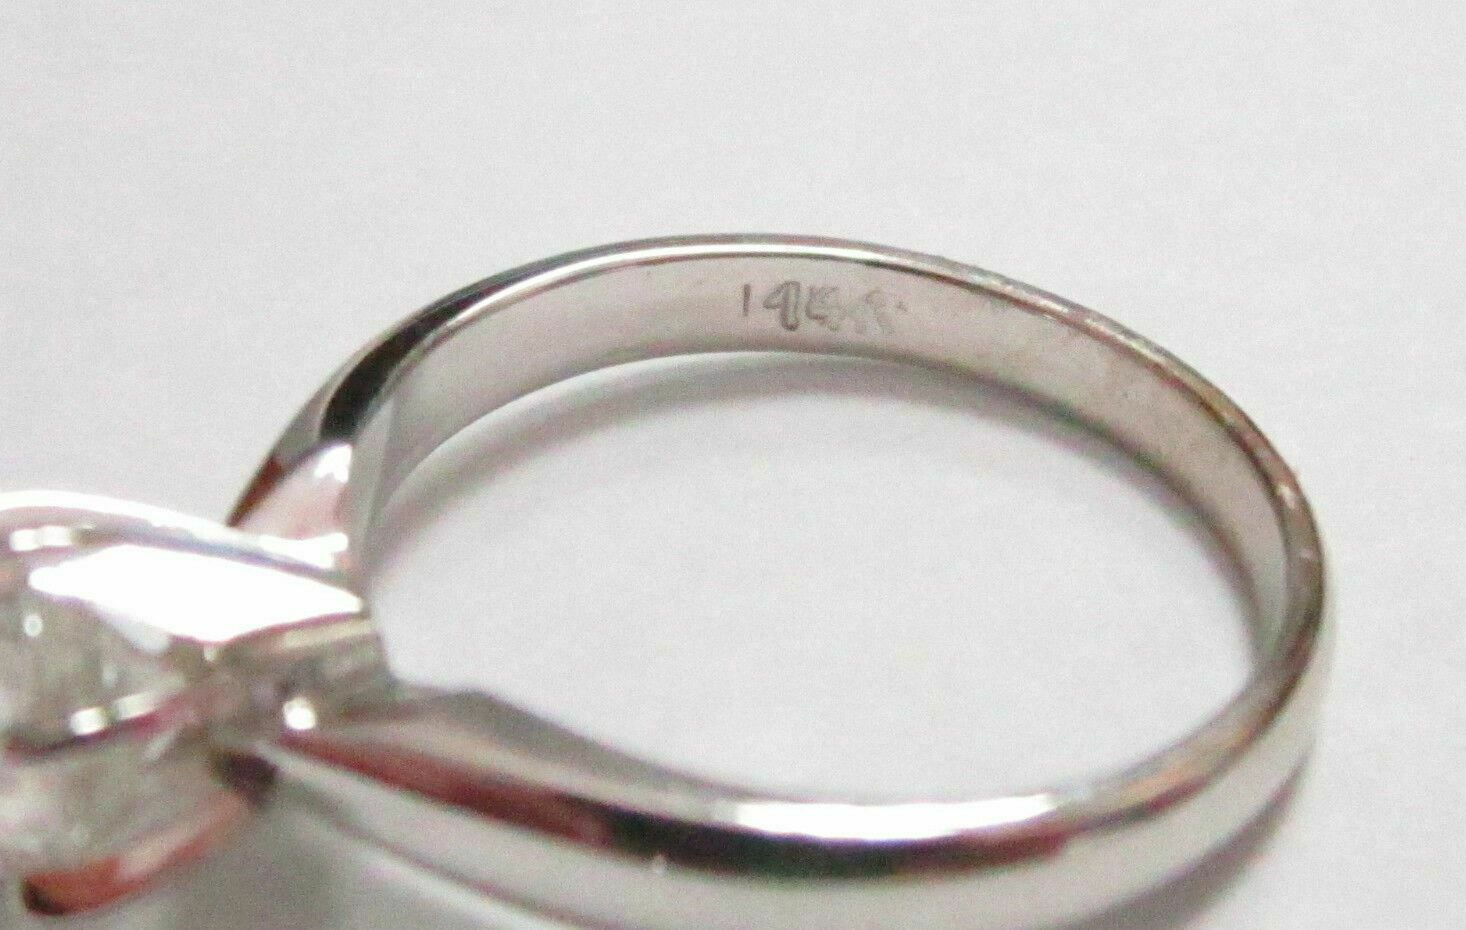 .77 TCW Round Cut Diamond Solitaire Engagement Ring Size 5.5 G I2 14k White Gold